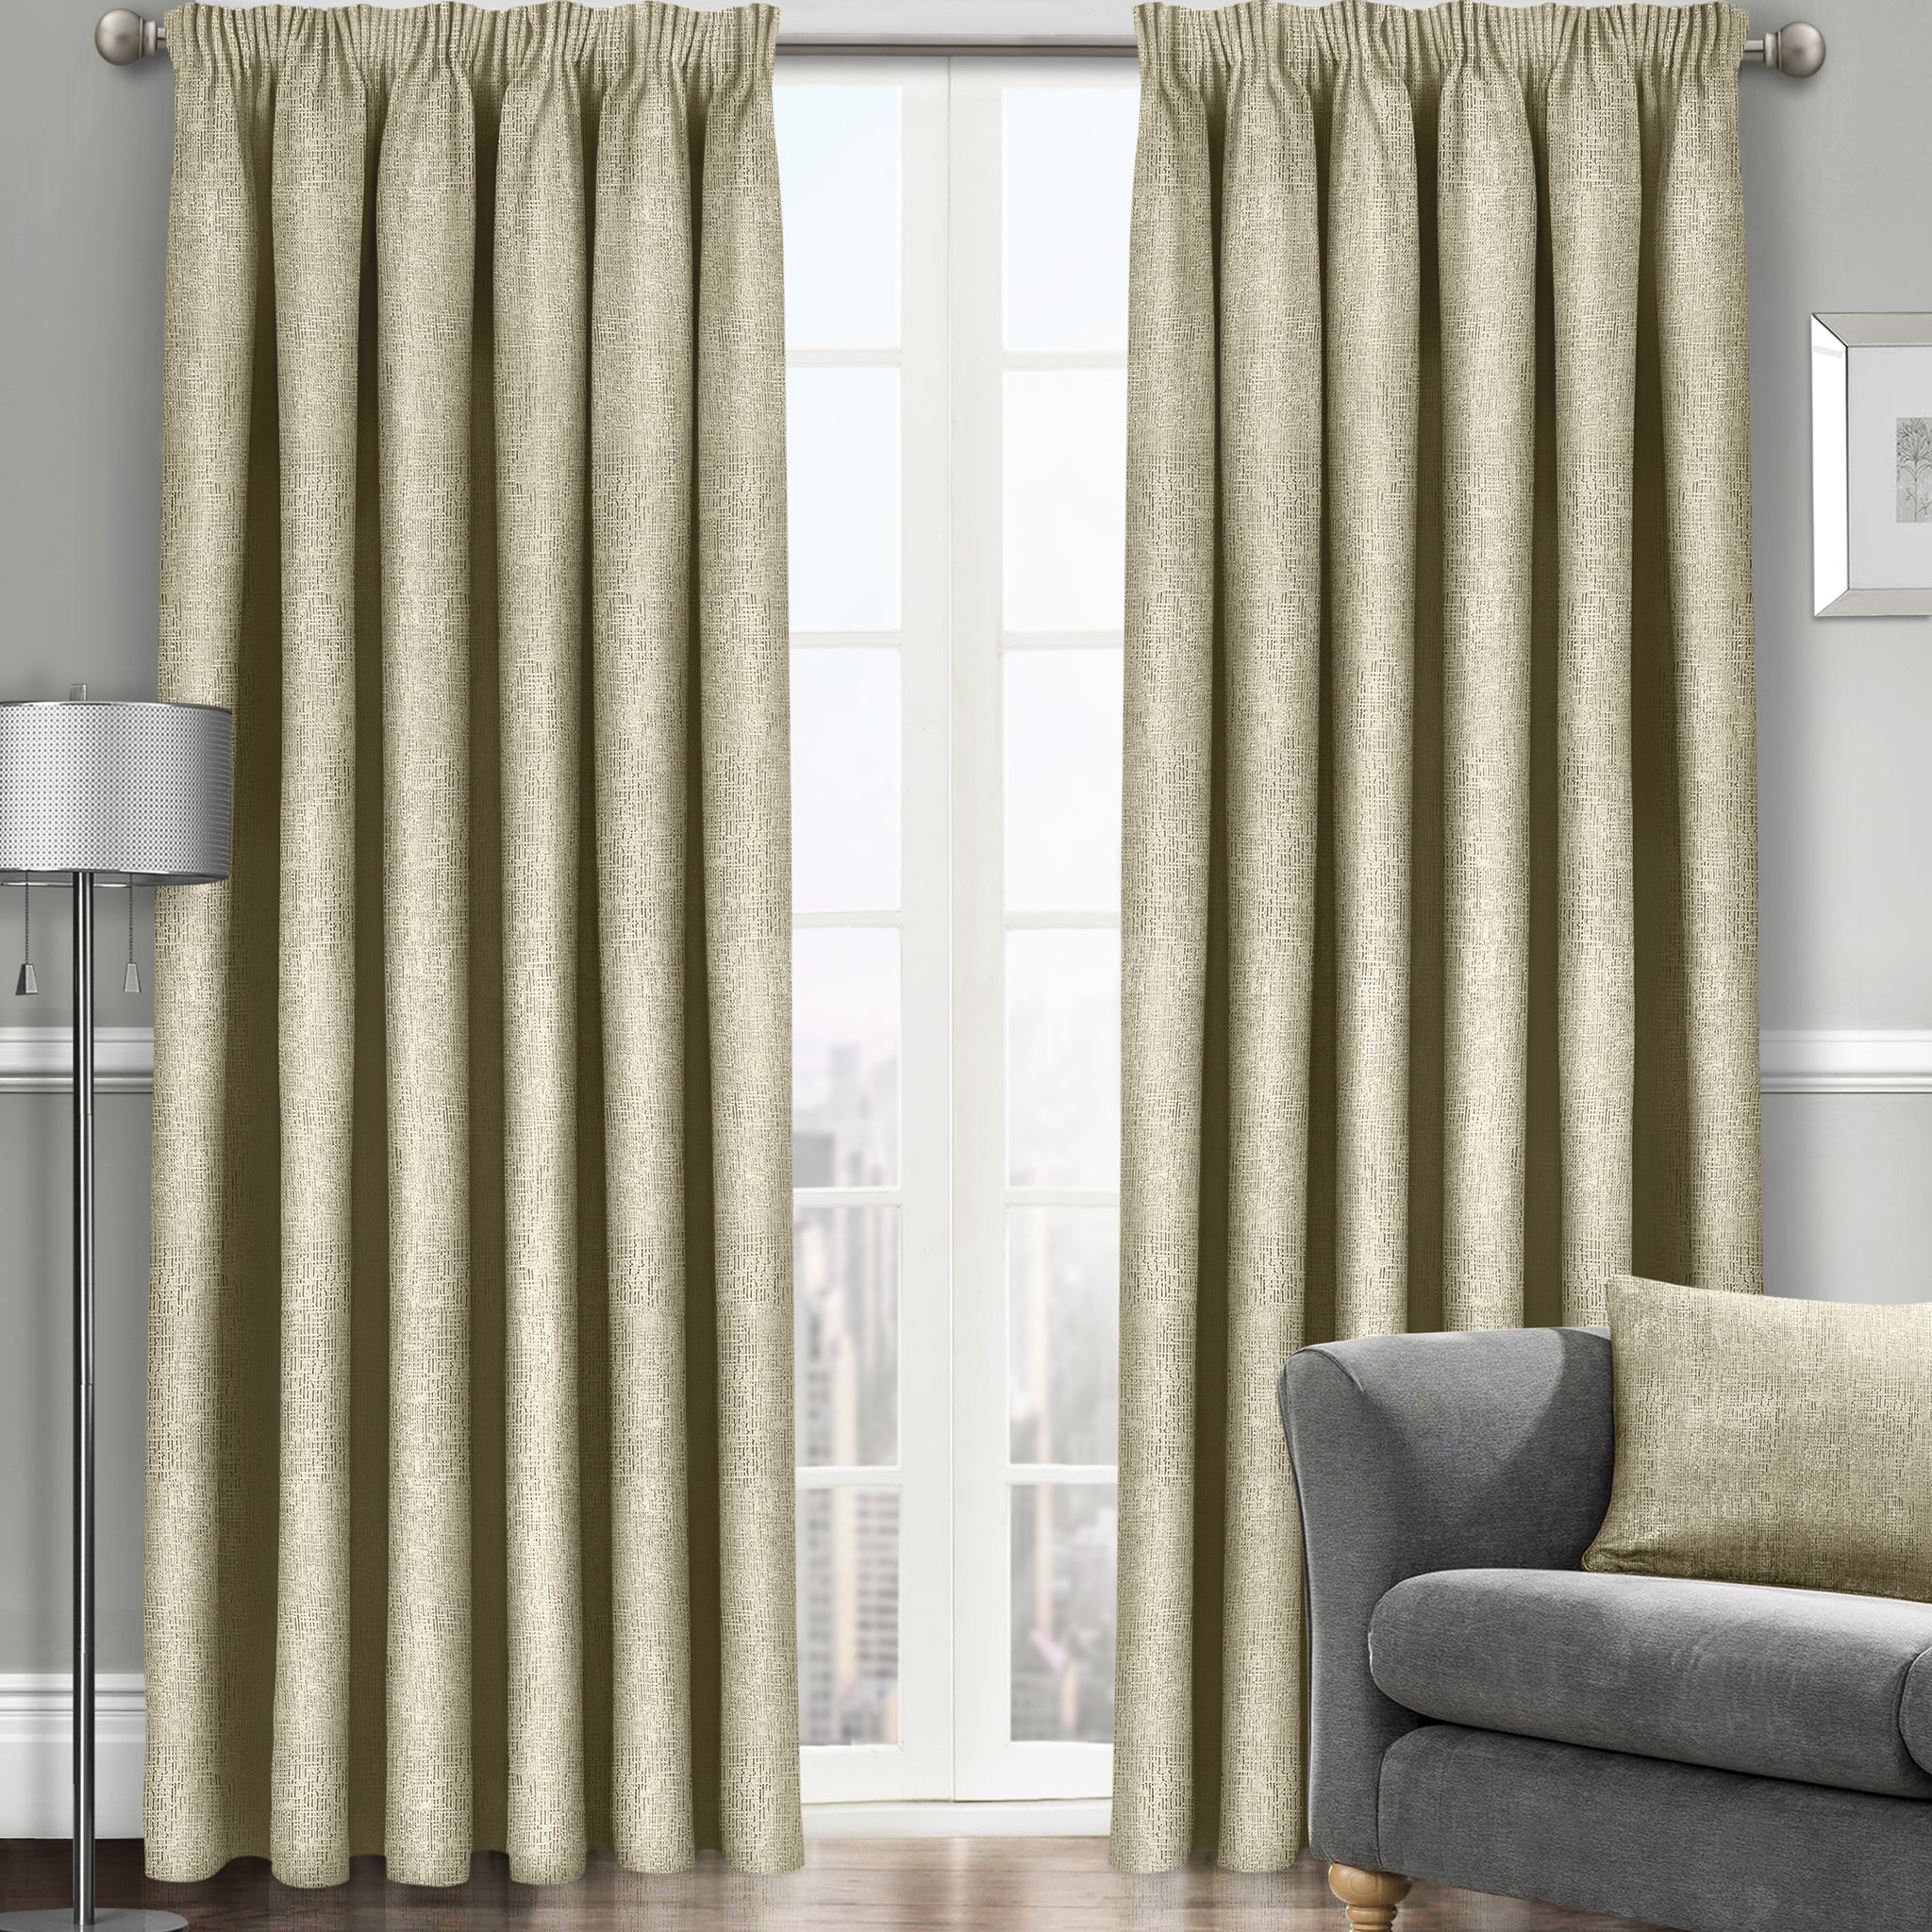 Textured Thermal Lined Pencil Pleat Curtains 64" x 90" - Latte